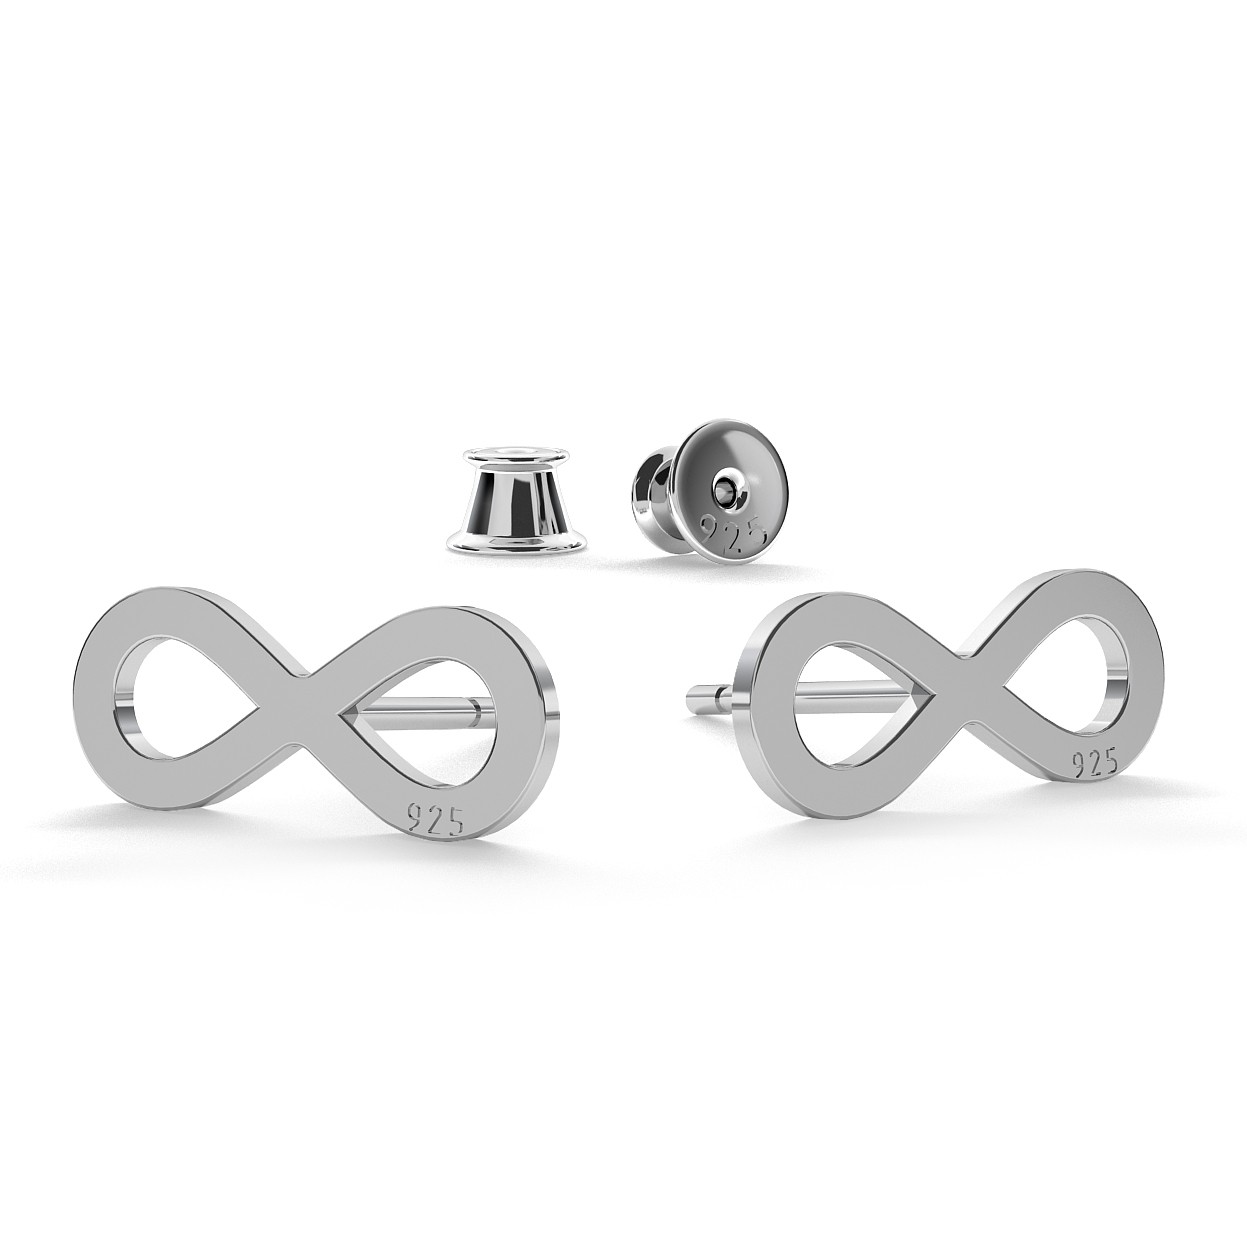 INFINITY EARRINGS, STERLING SILVER (925) RHODIUM OR GOLD PLATED